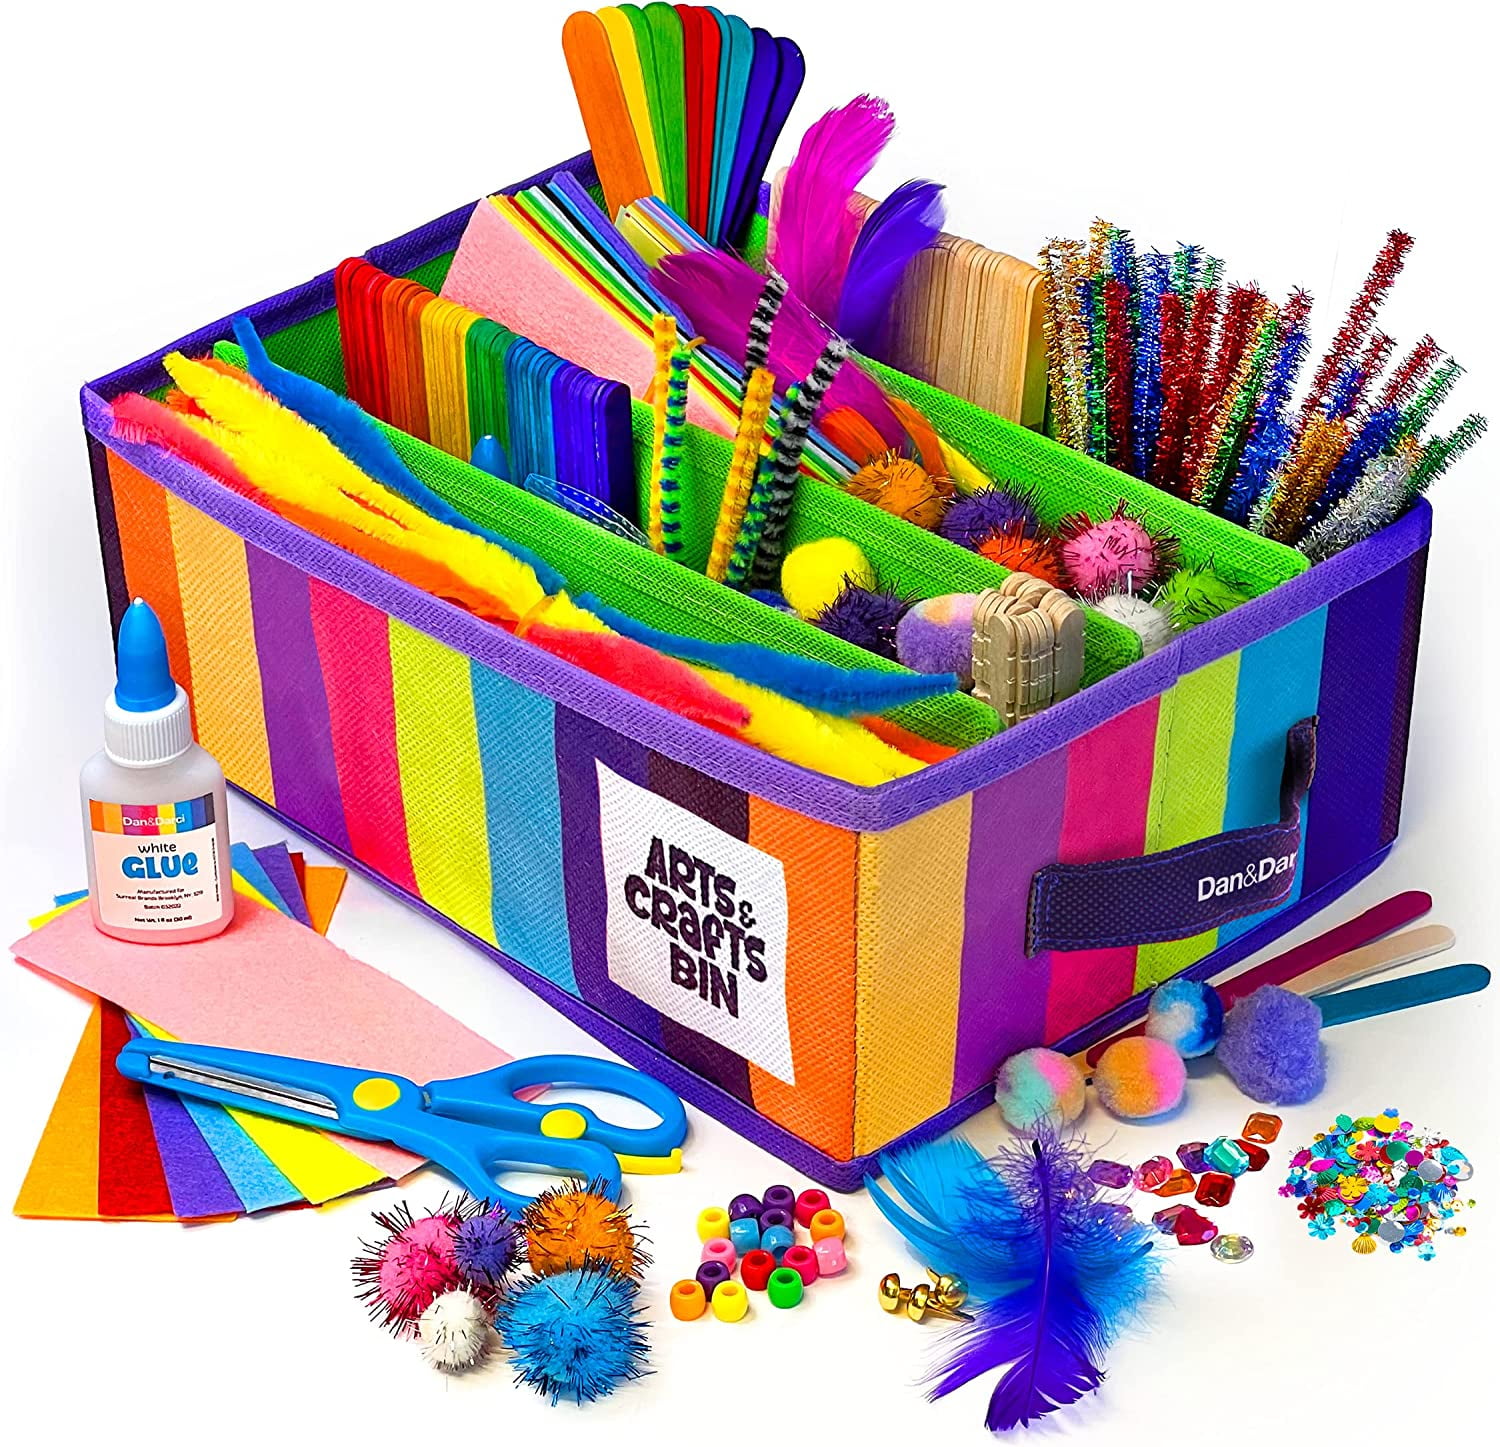 Darice Arts and Crafts Kit - 500+ Piece Kids Craft Supplies & Materials,  Art Supplies Box for Girls & Boys Age 4 5 6 7 8 9